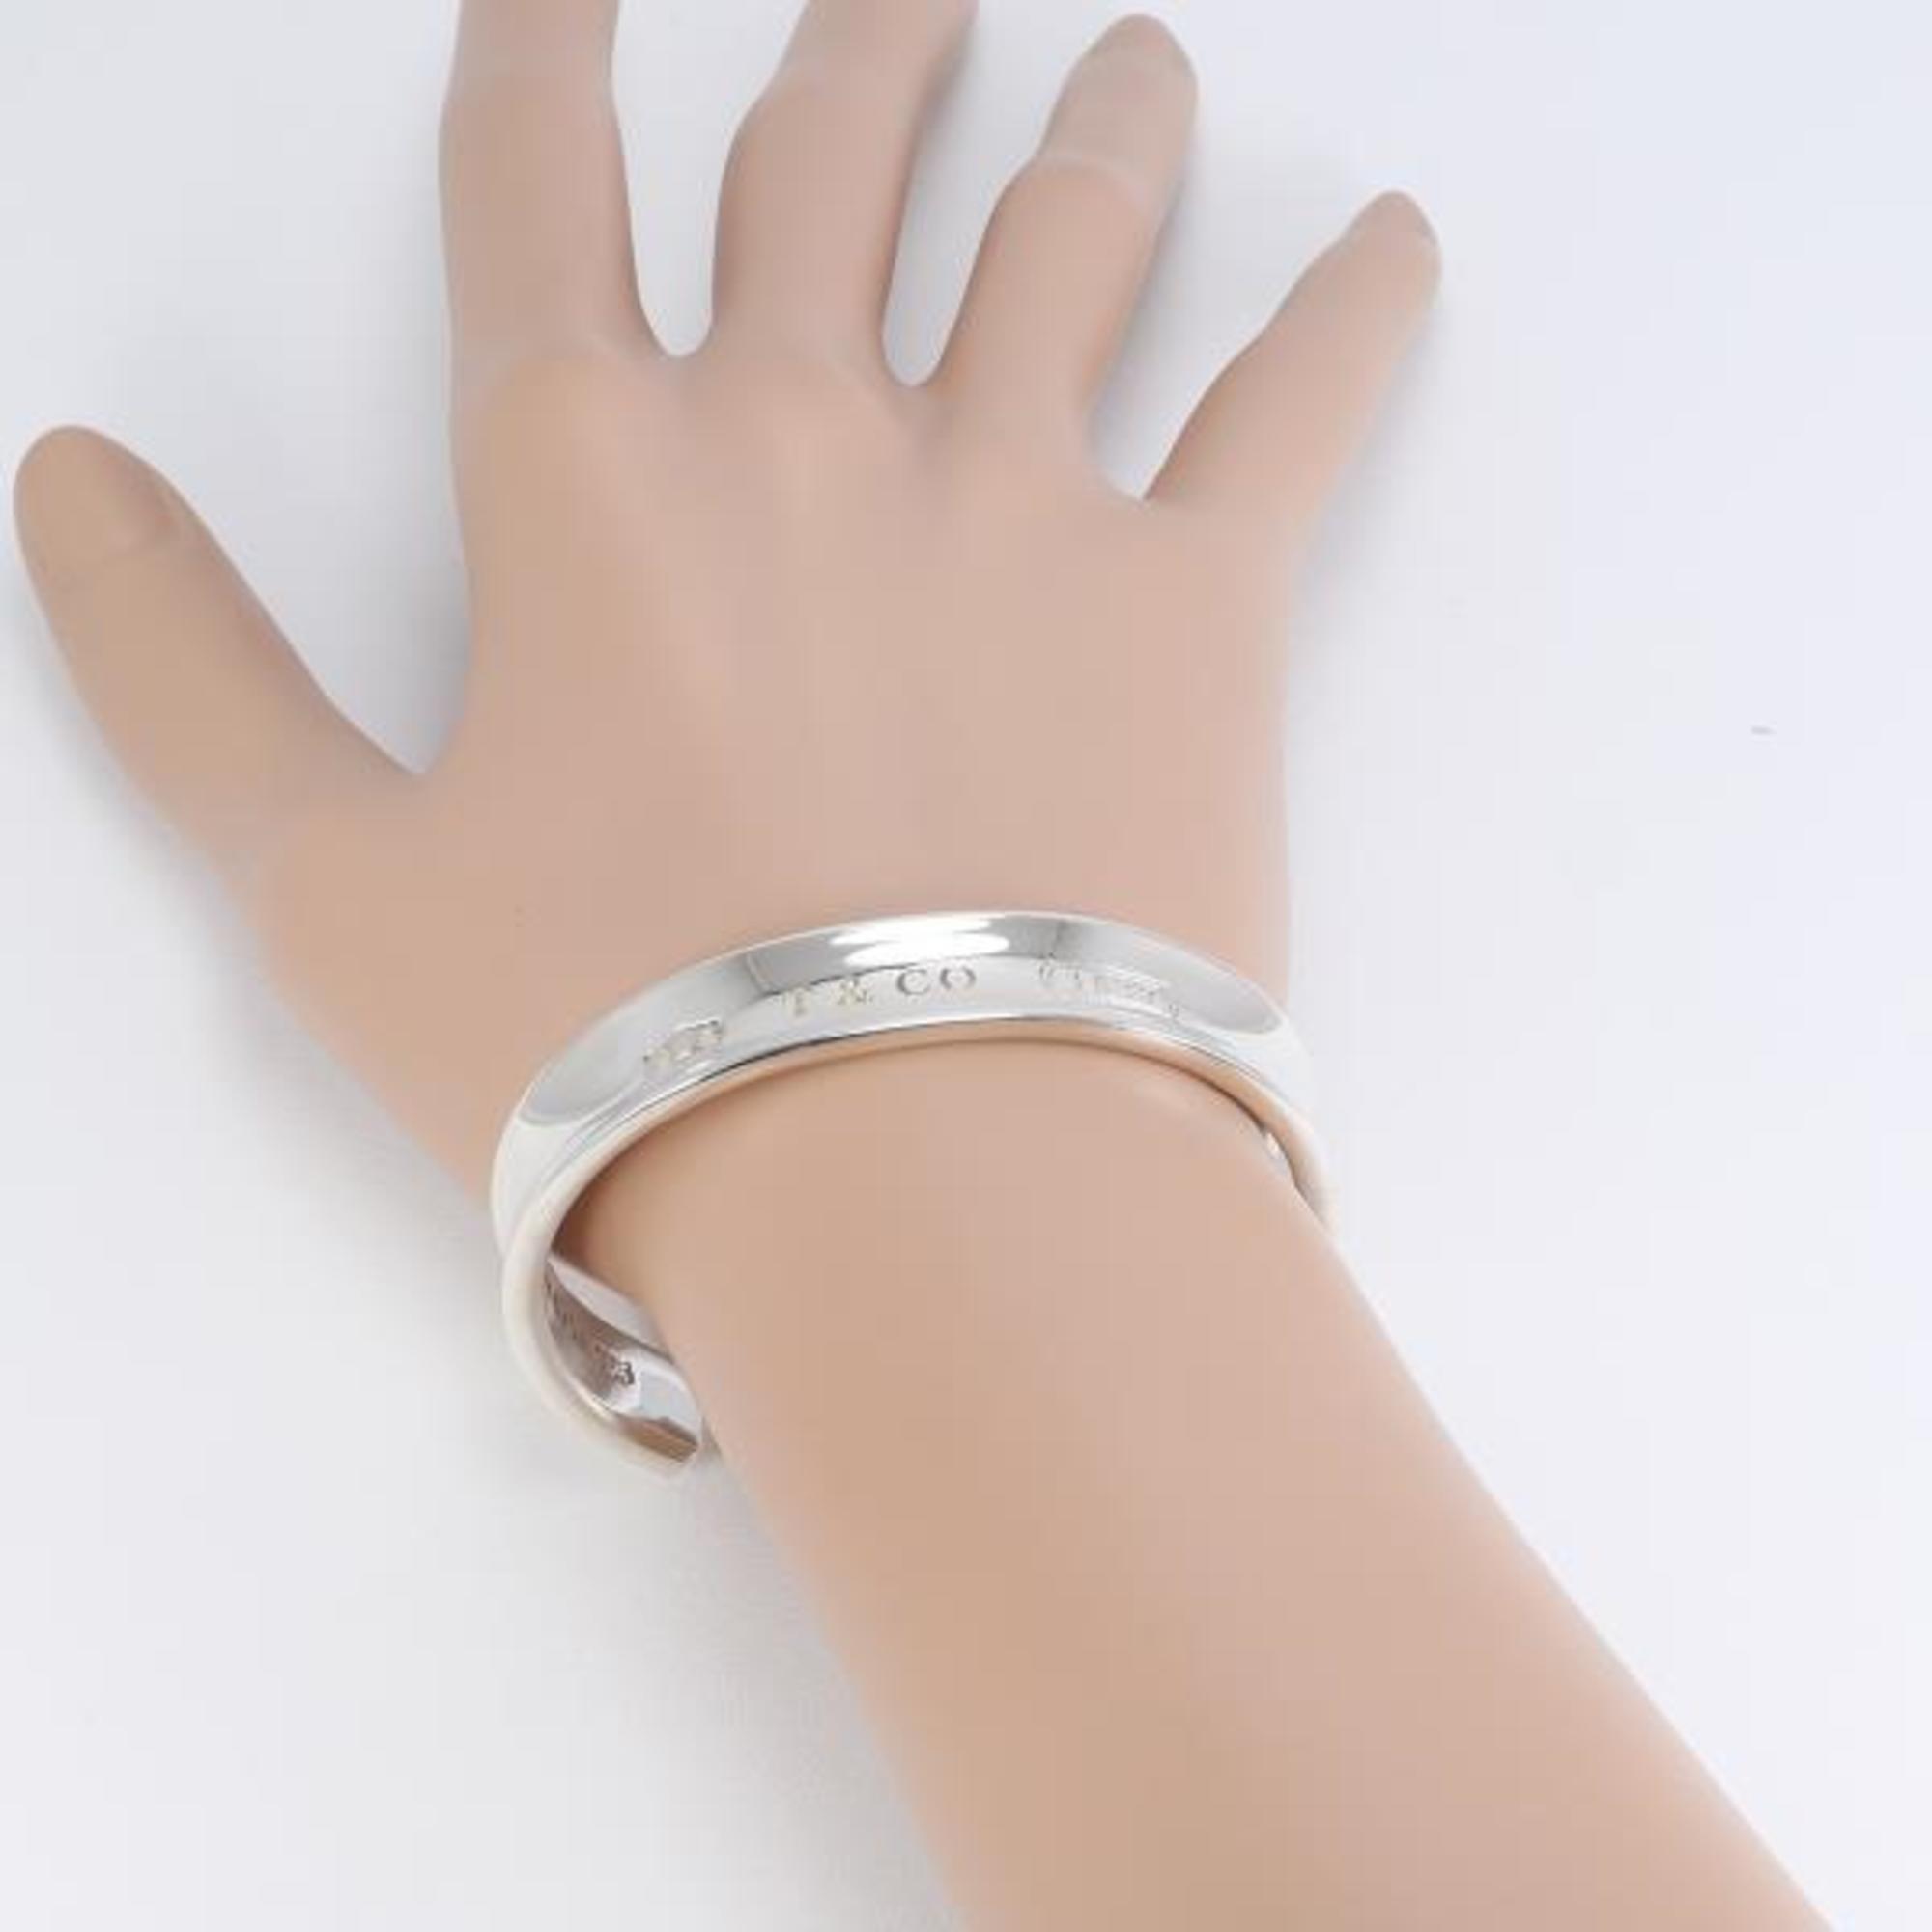 Tiffany 1837 Silver Bangle Total weight approx. 37.6g 16.5cm